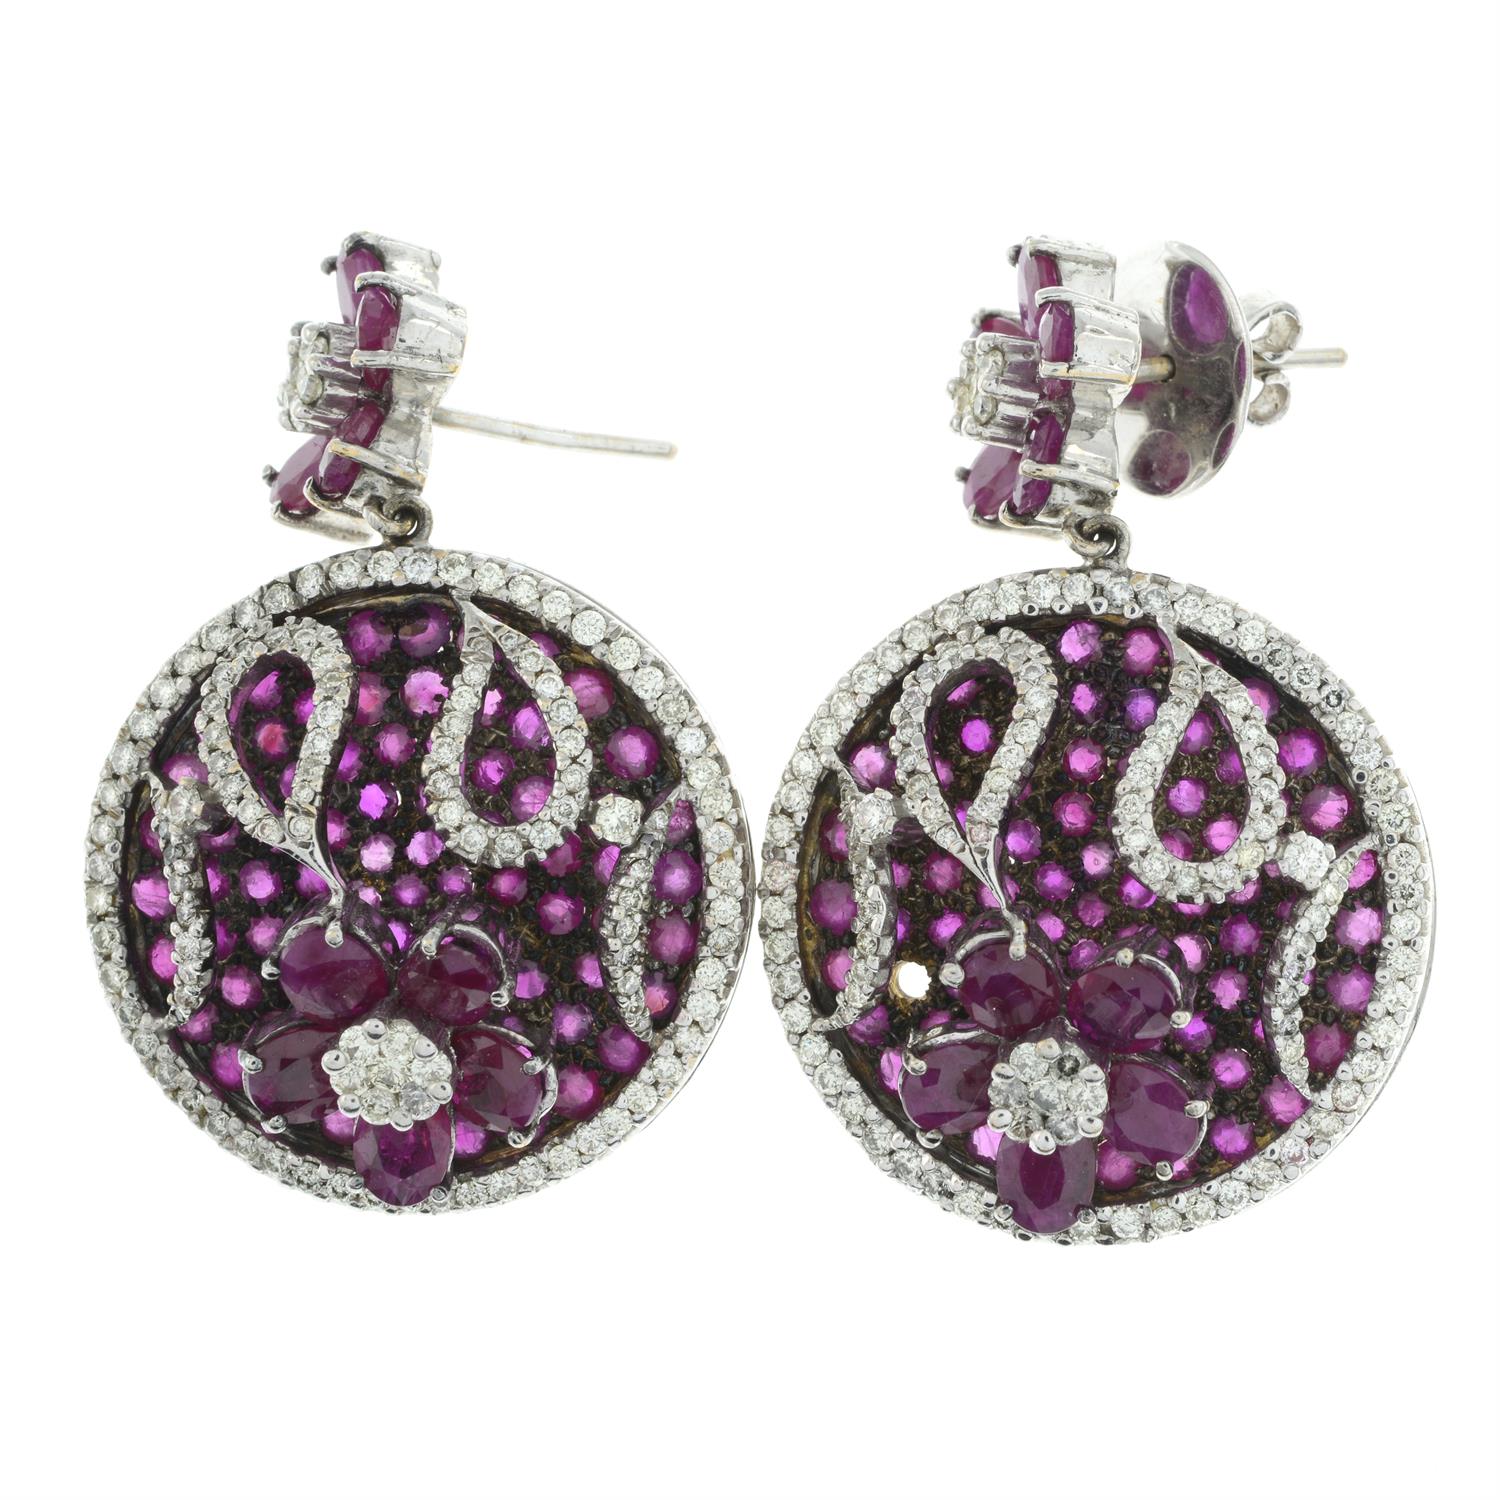 Ruby and diamond floral earrings - Image 4 of 4